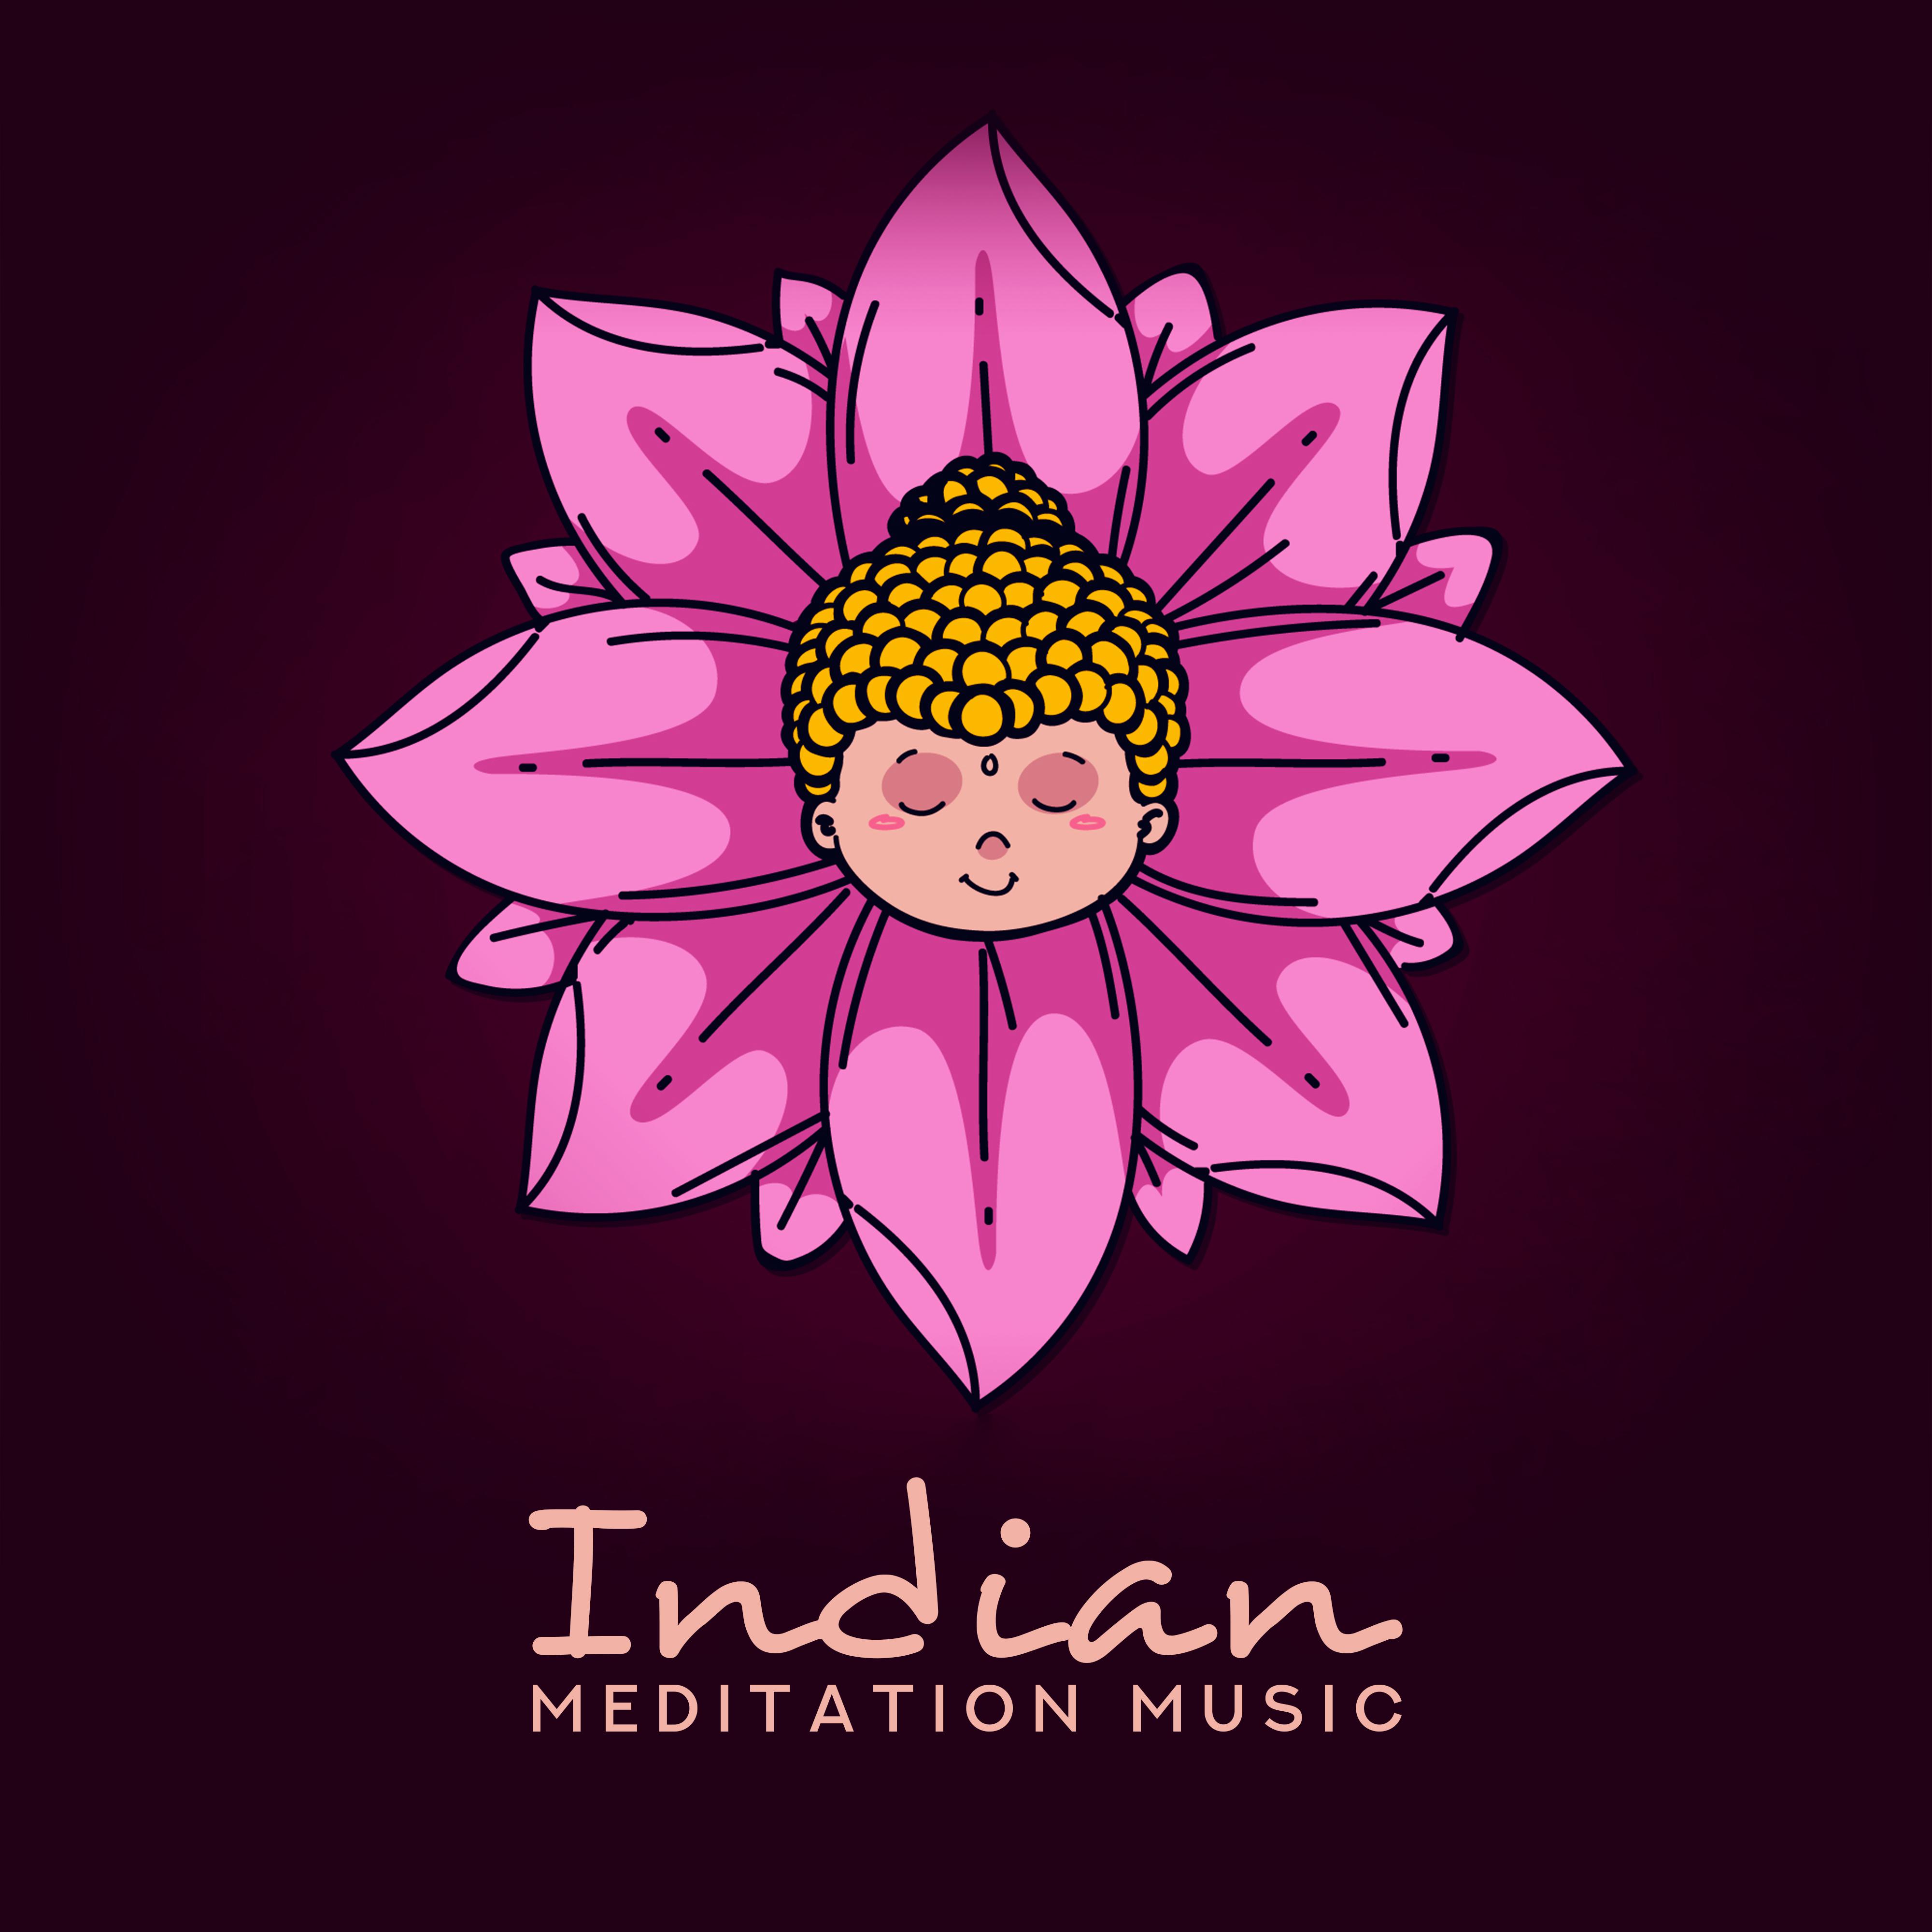 Indian Meditation Music: 15 Songs for the Practice of Buddhist Rituals (Meditation, Mantras, Yoga, Mudras and Many Others)